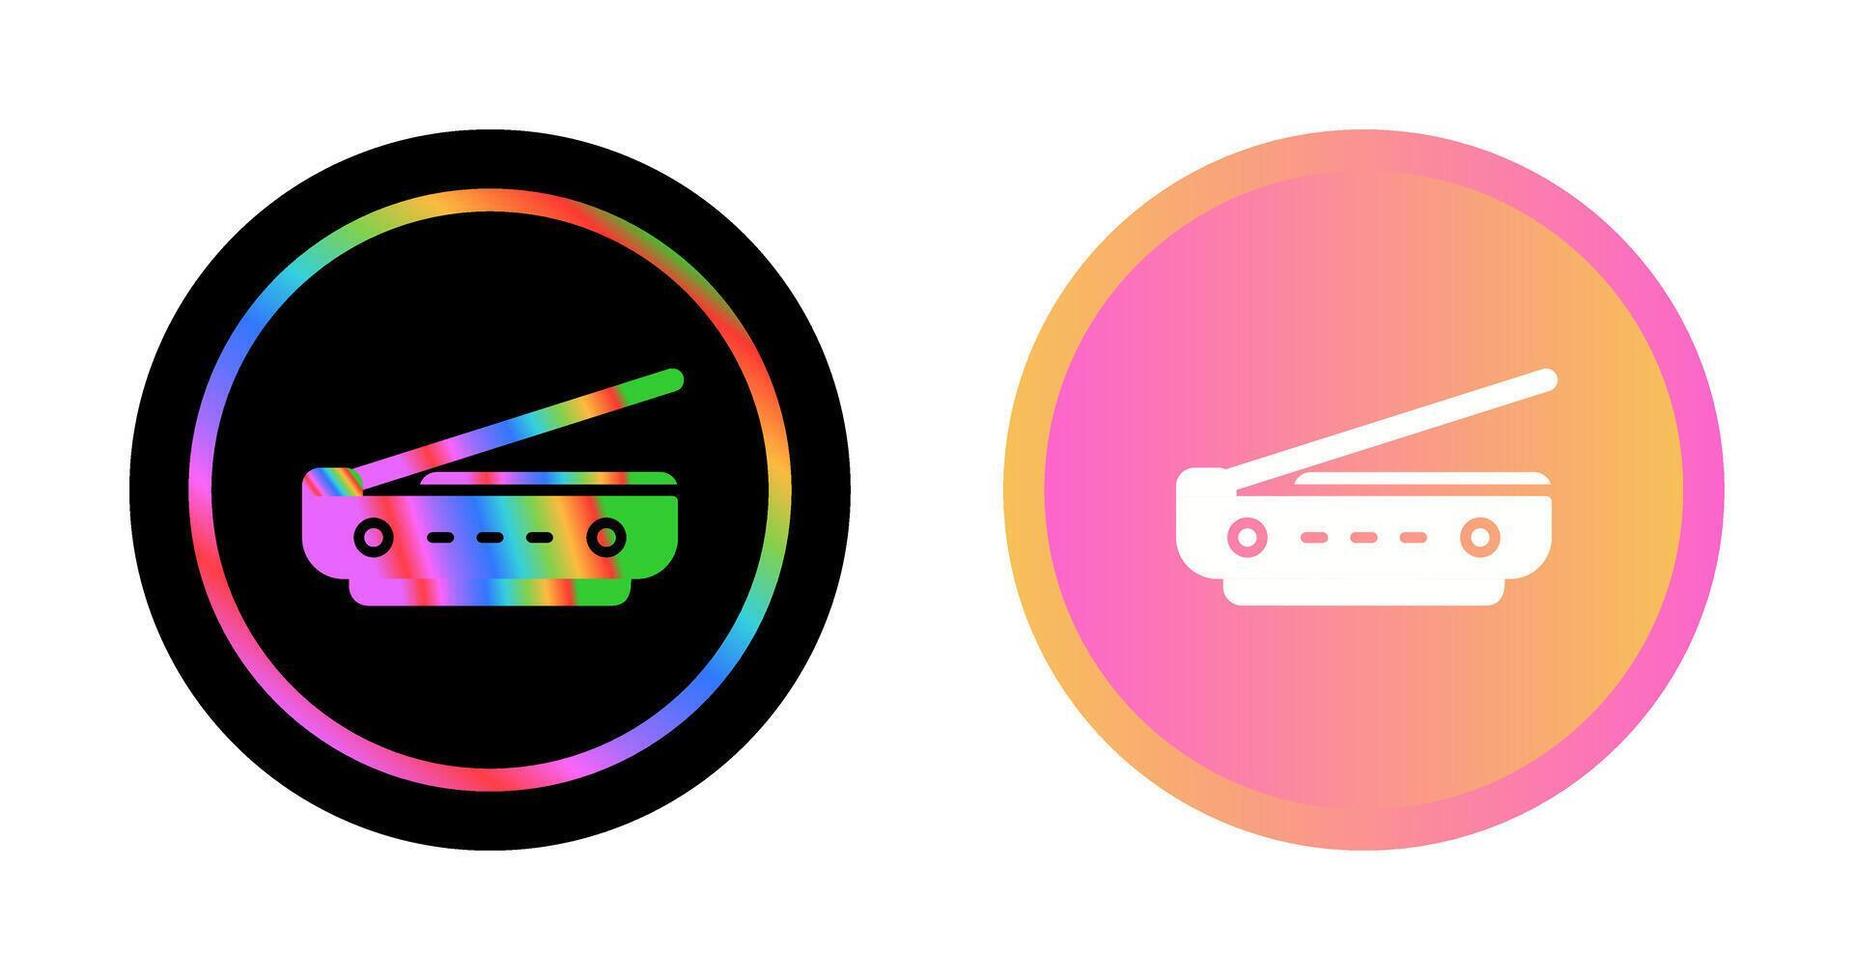 Scanner Vector Icon